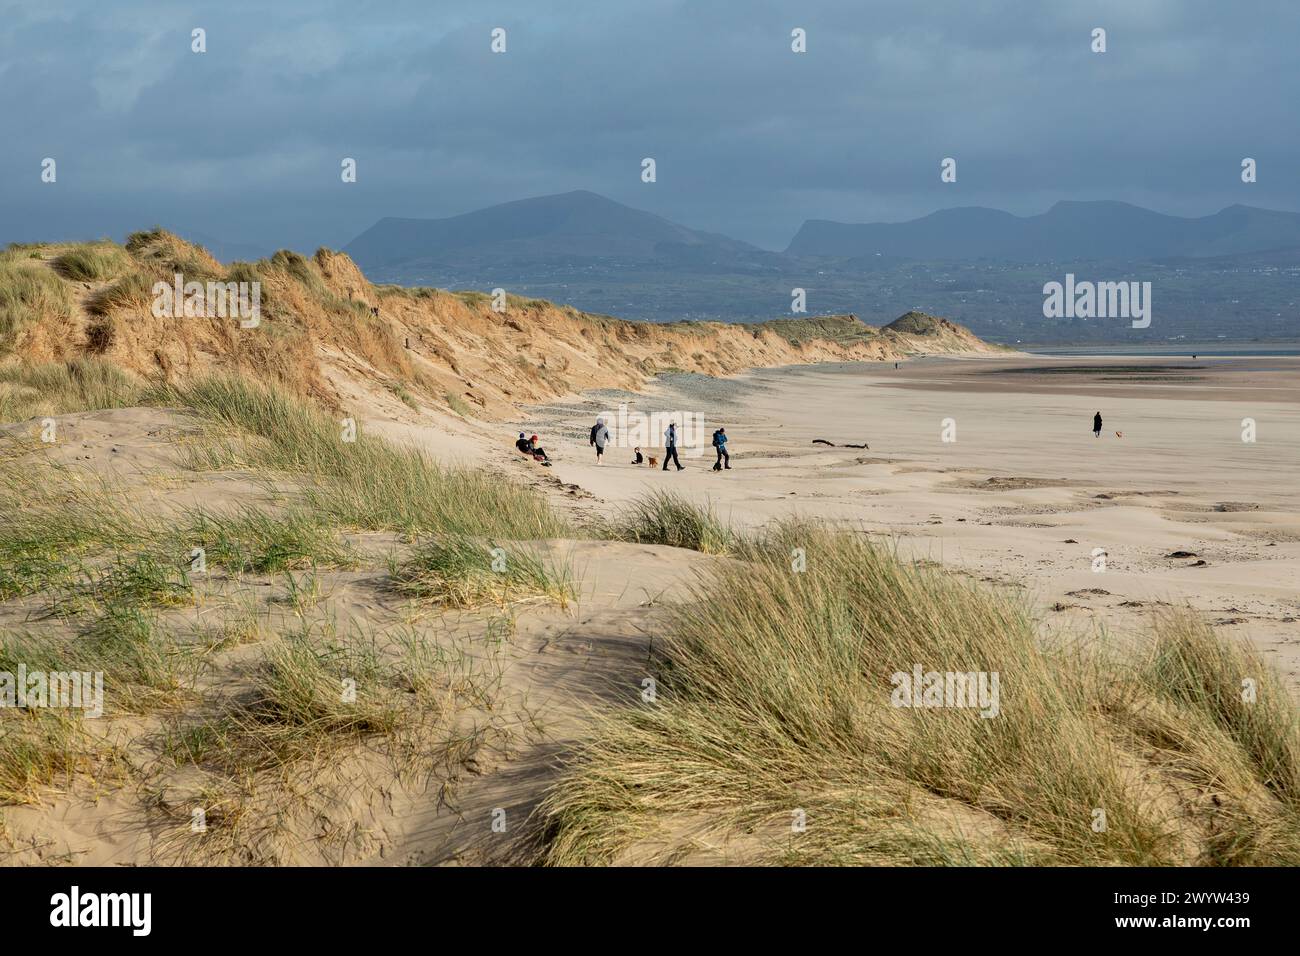 Beach, sand dunes, people, clouds, mountains, LLanddwyn Bay, Newborough, Anglesey Island, Wales, Great Britain Stock Photo